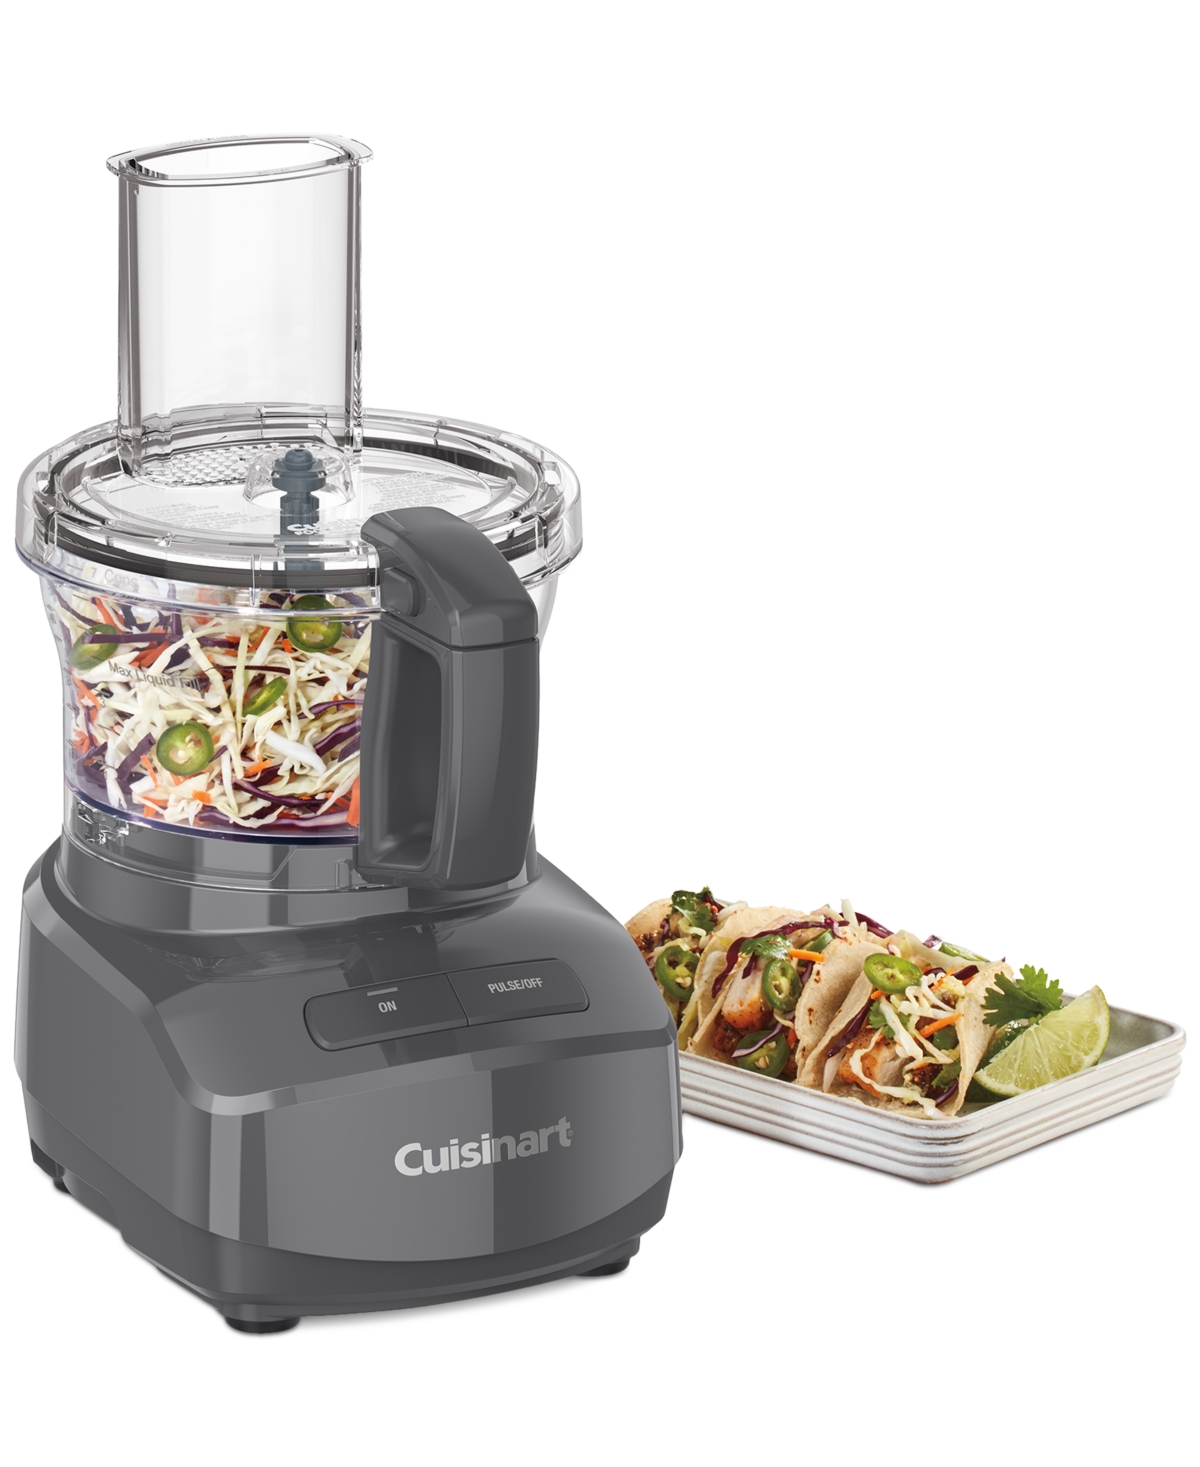 Cuisinart 7-cup Food Processor In Anchor Gray